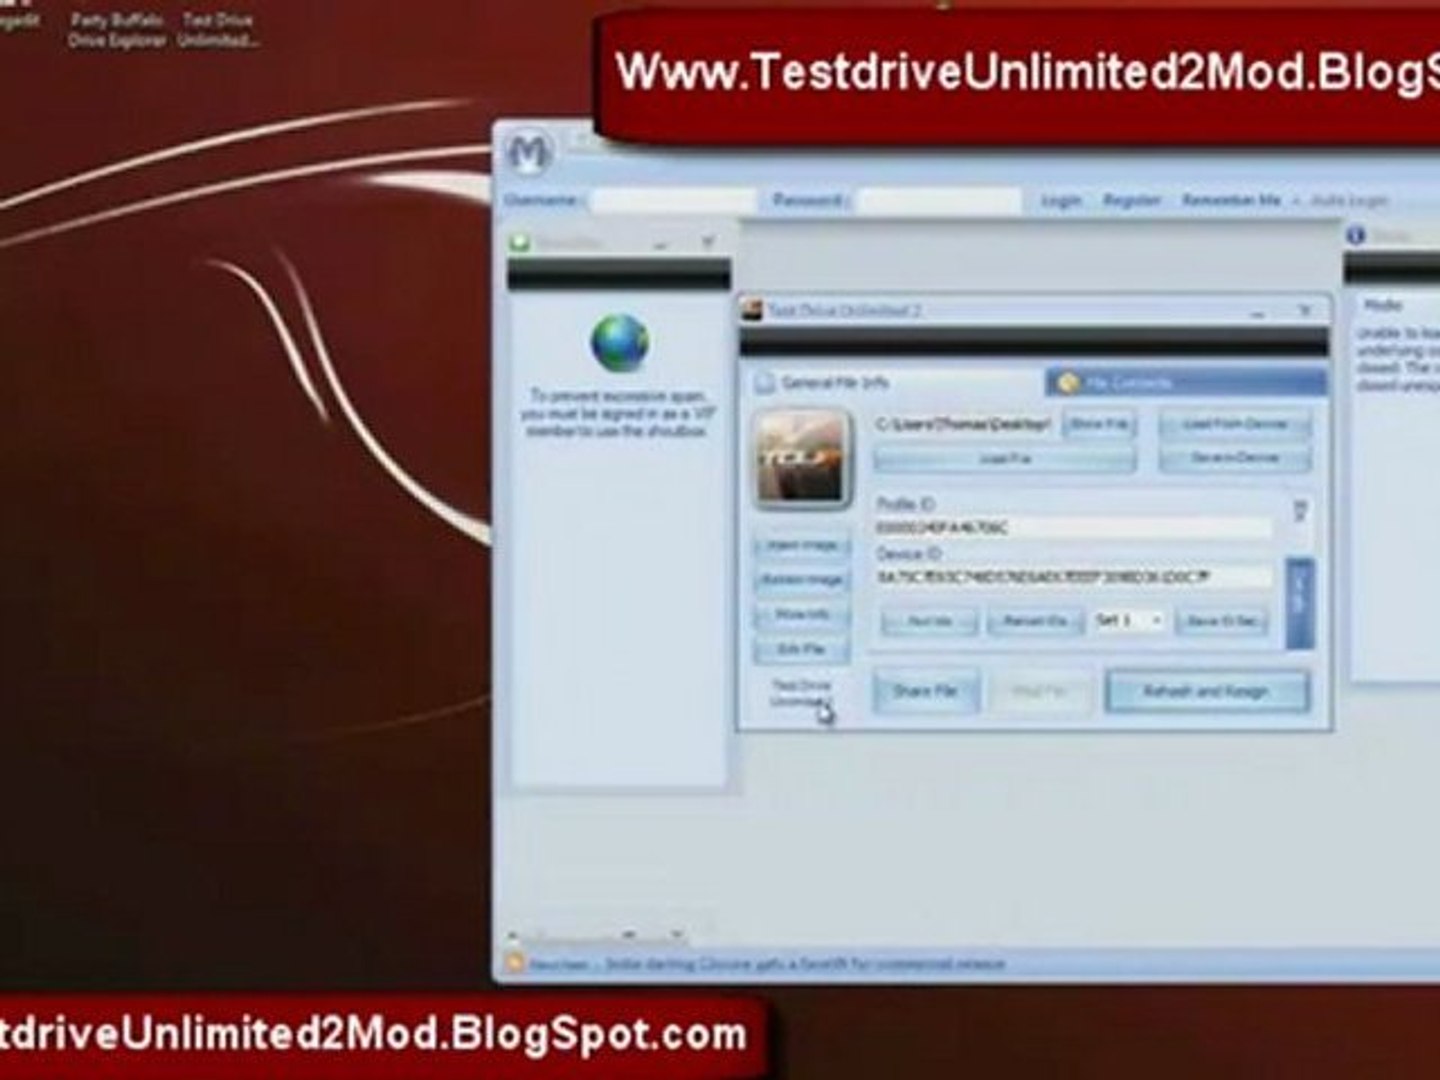 How to Mod Test Drive Unlimited 2 Free on Xbox 360 - video Dailymotion